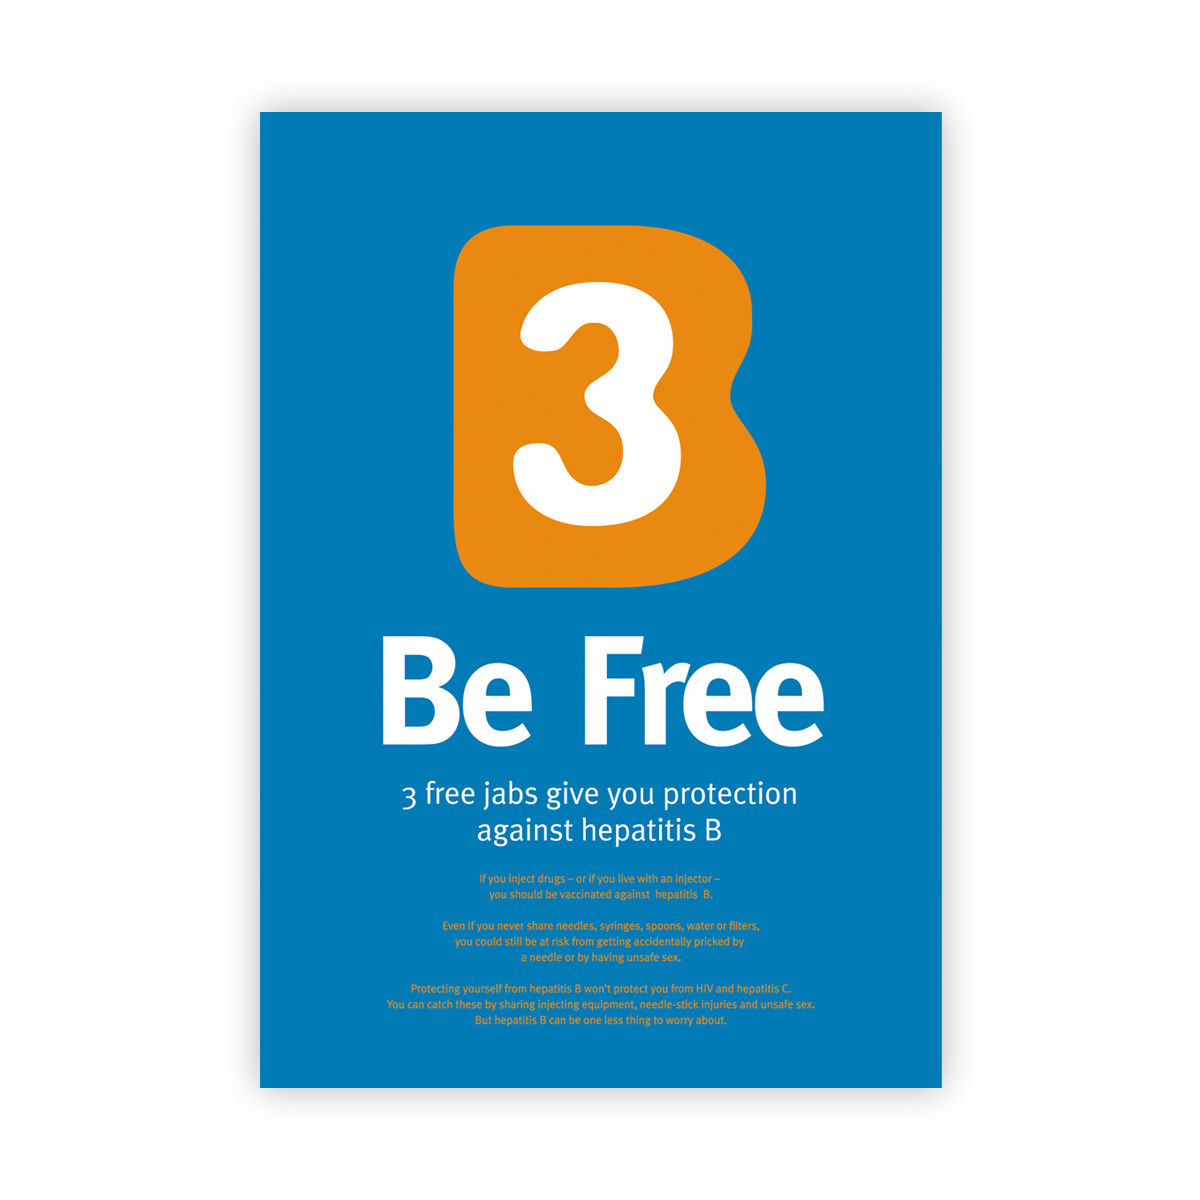 'B3 Be Free' campaign: poster (A3)